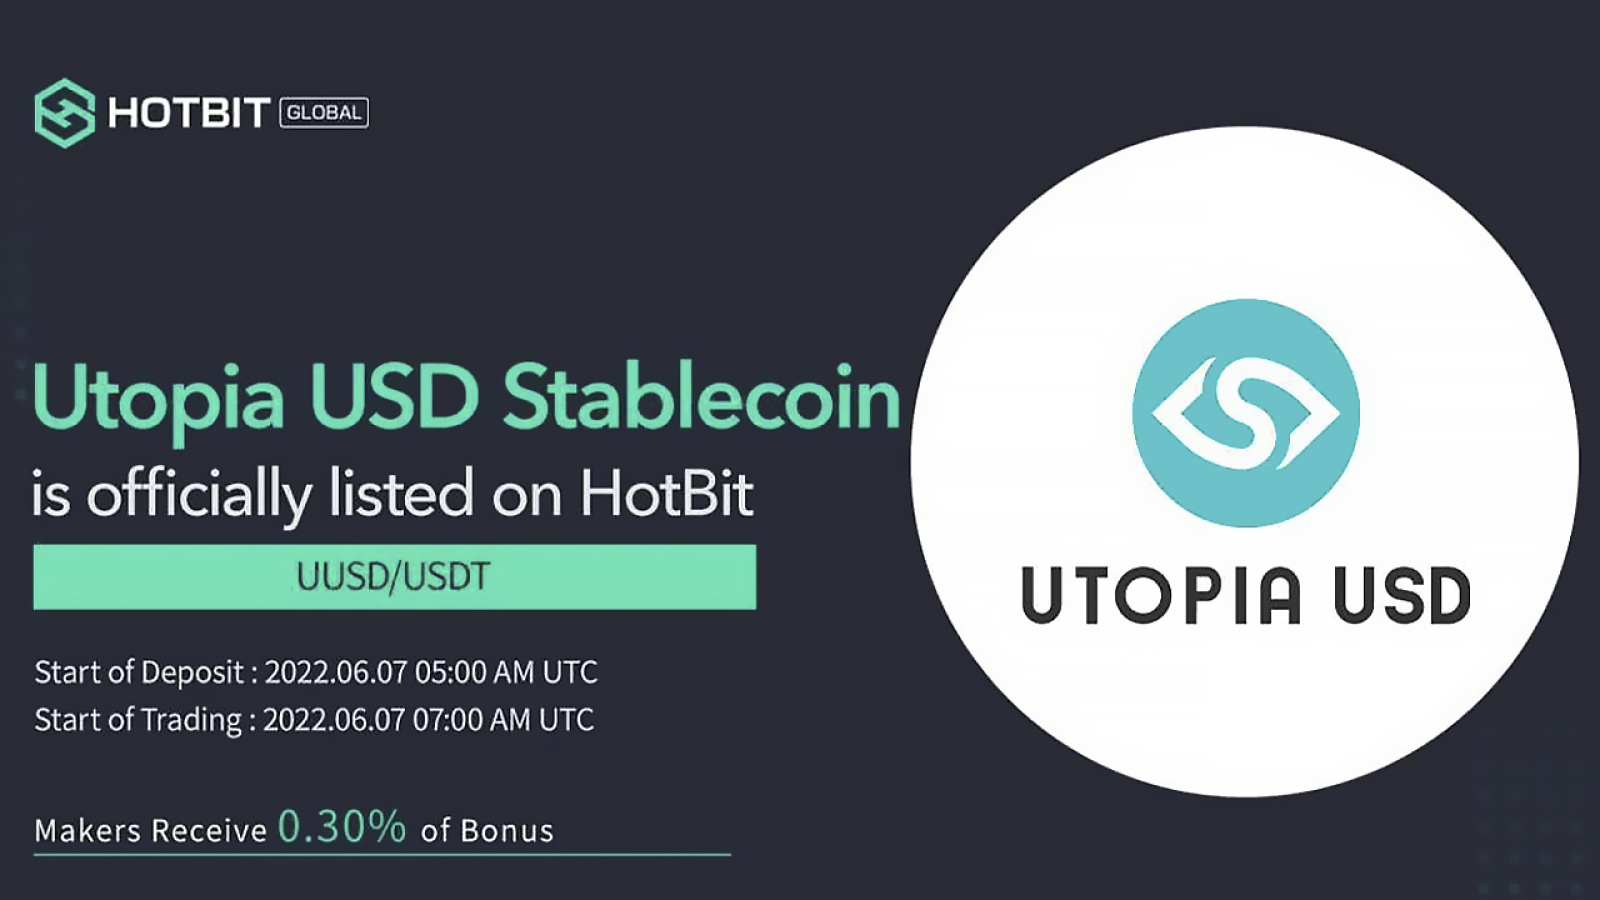 Hotbit Listed Utopia USD Stablecoin